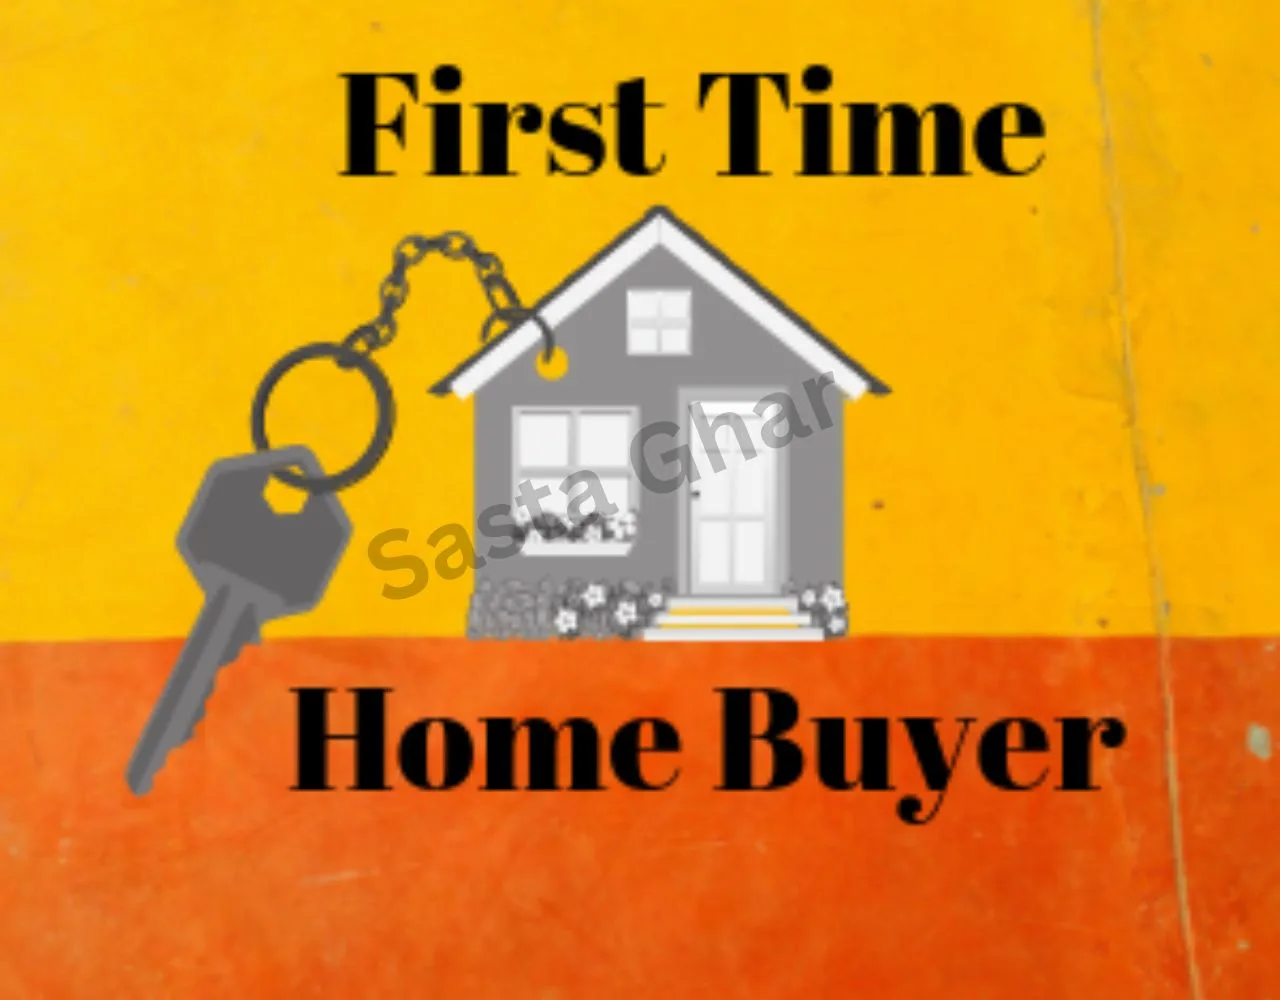 Top Tips for First-Time Homebuyers